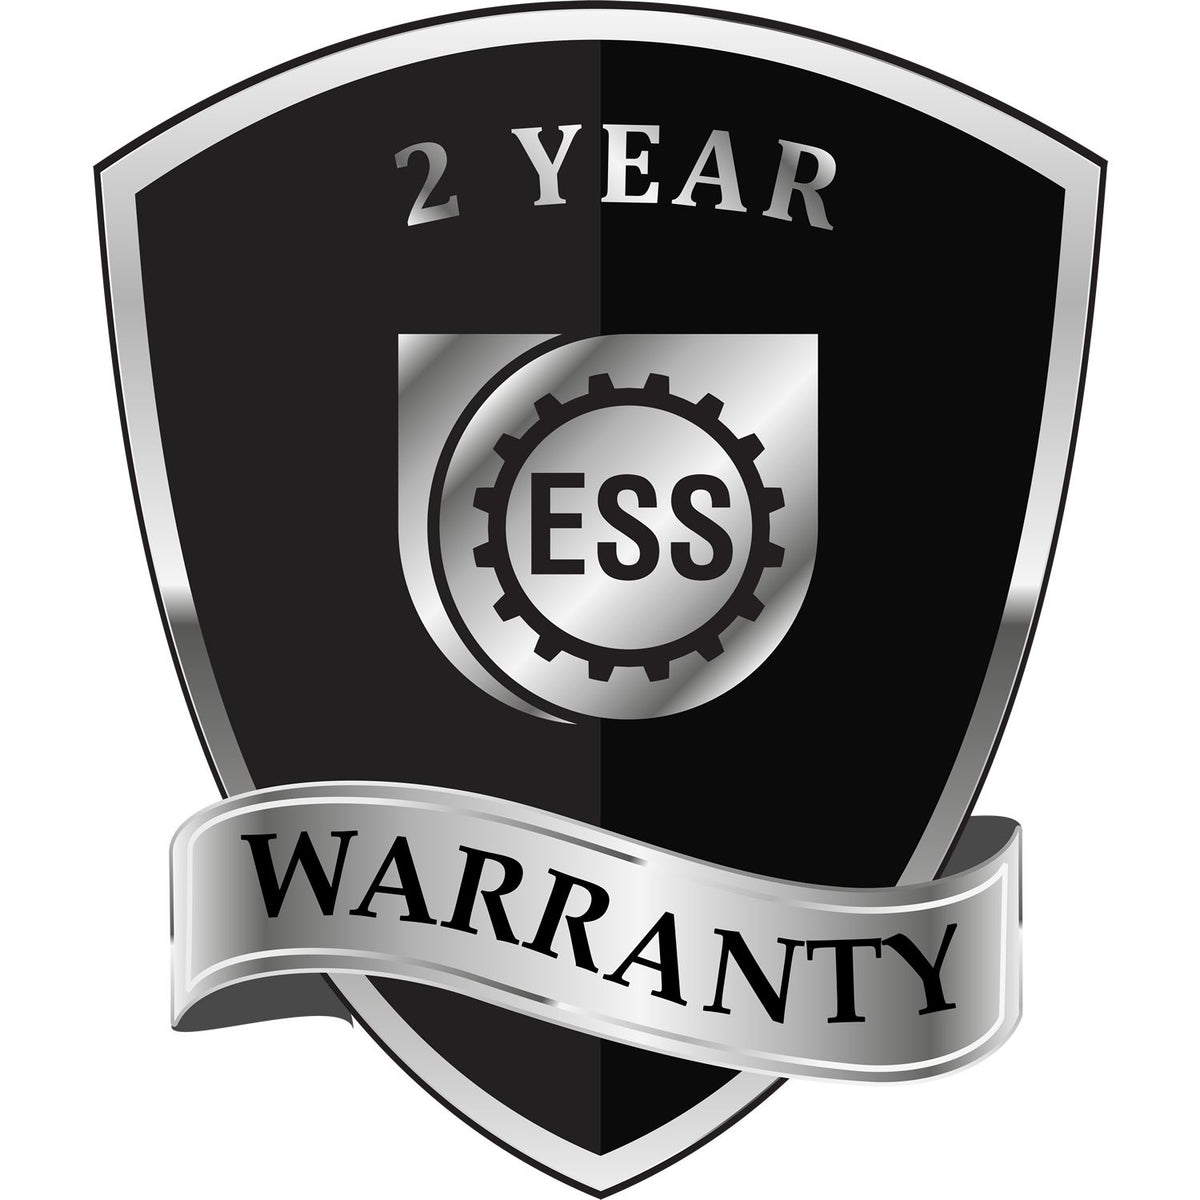 A black and silver badge or emblem showing warranty information for the Hybrid Connecticut Architect Seal